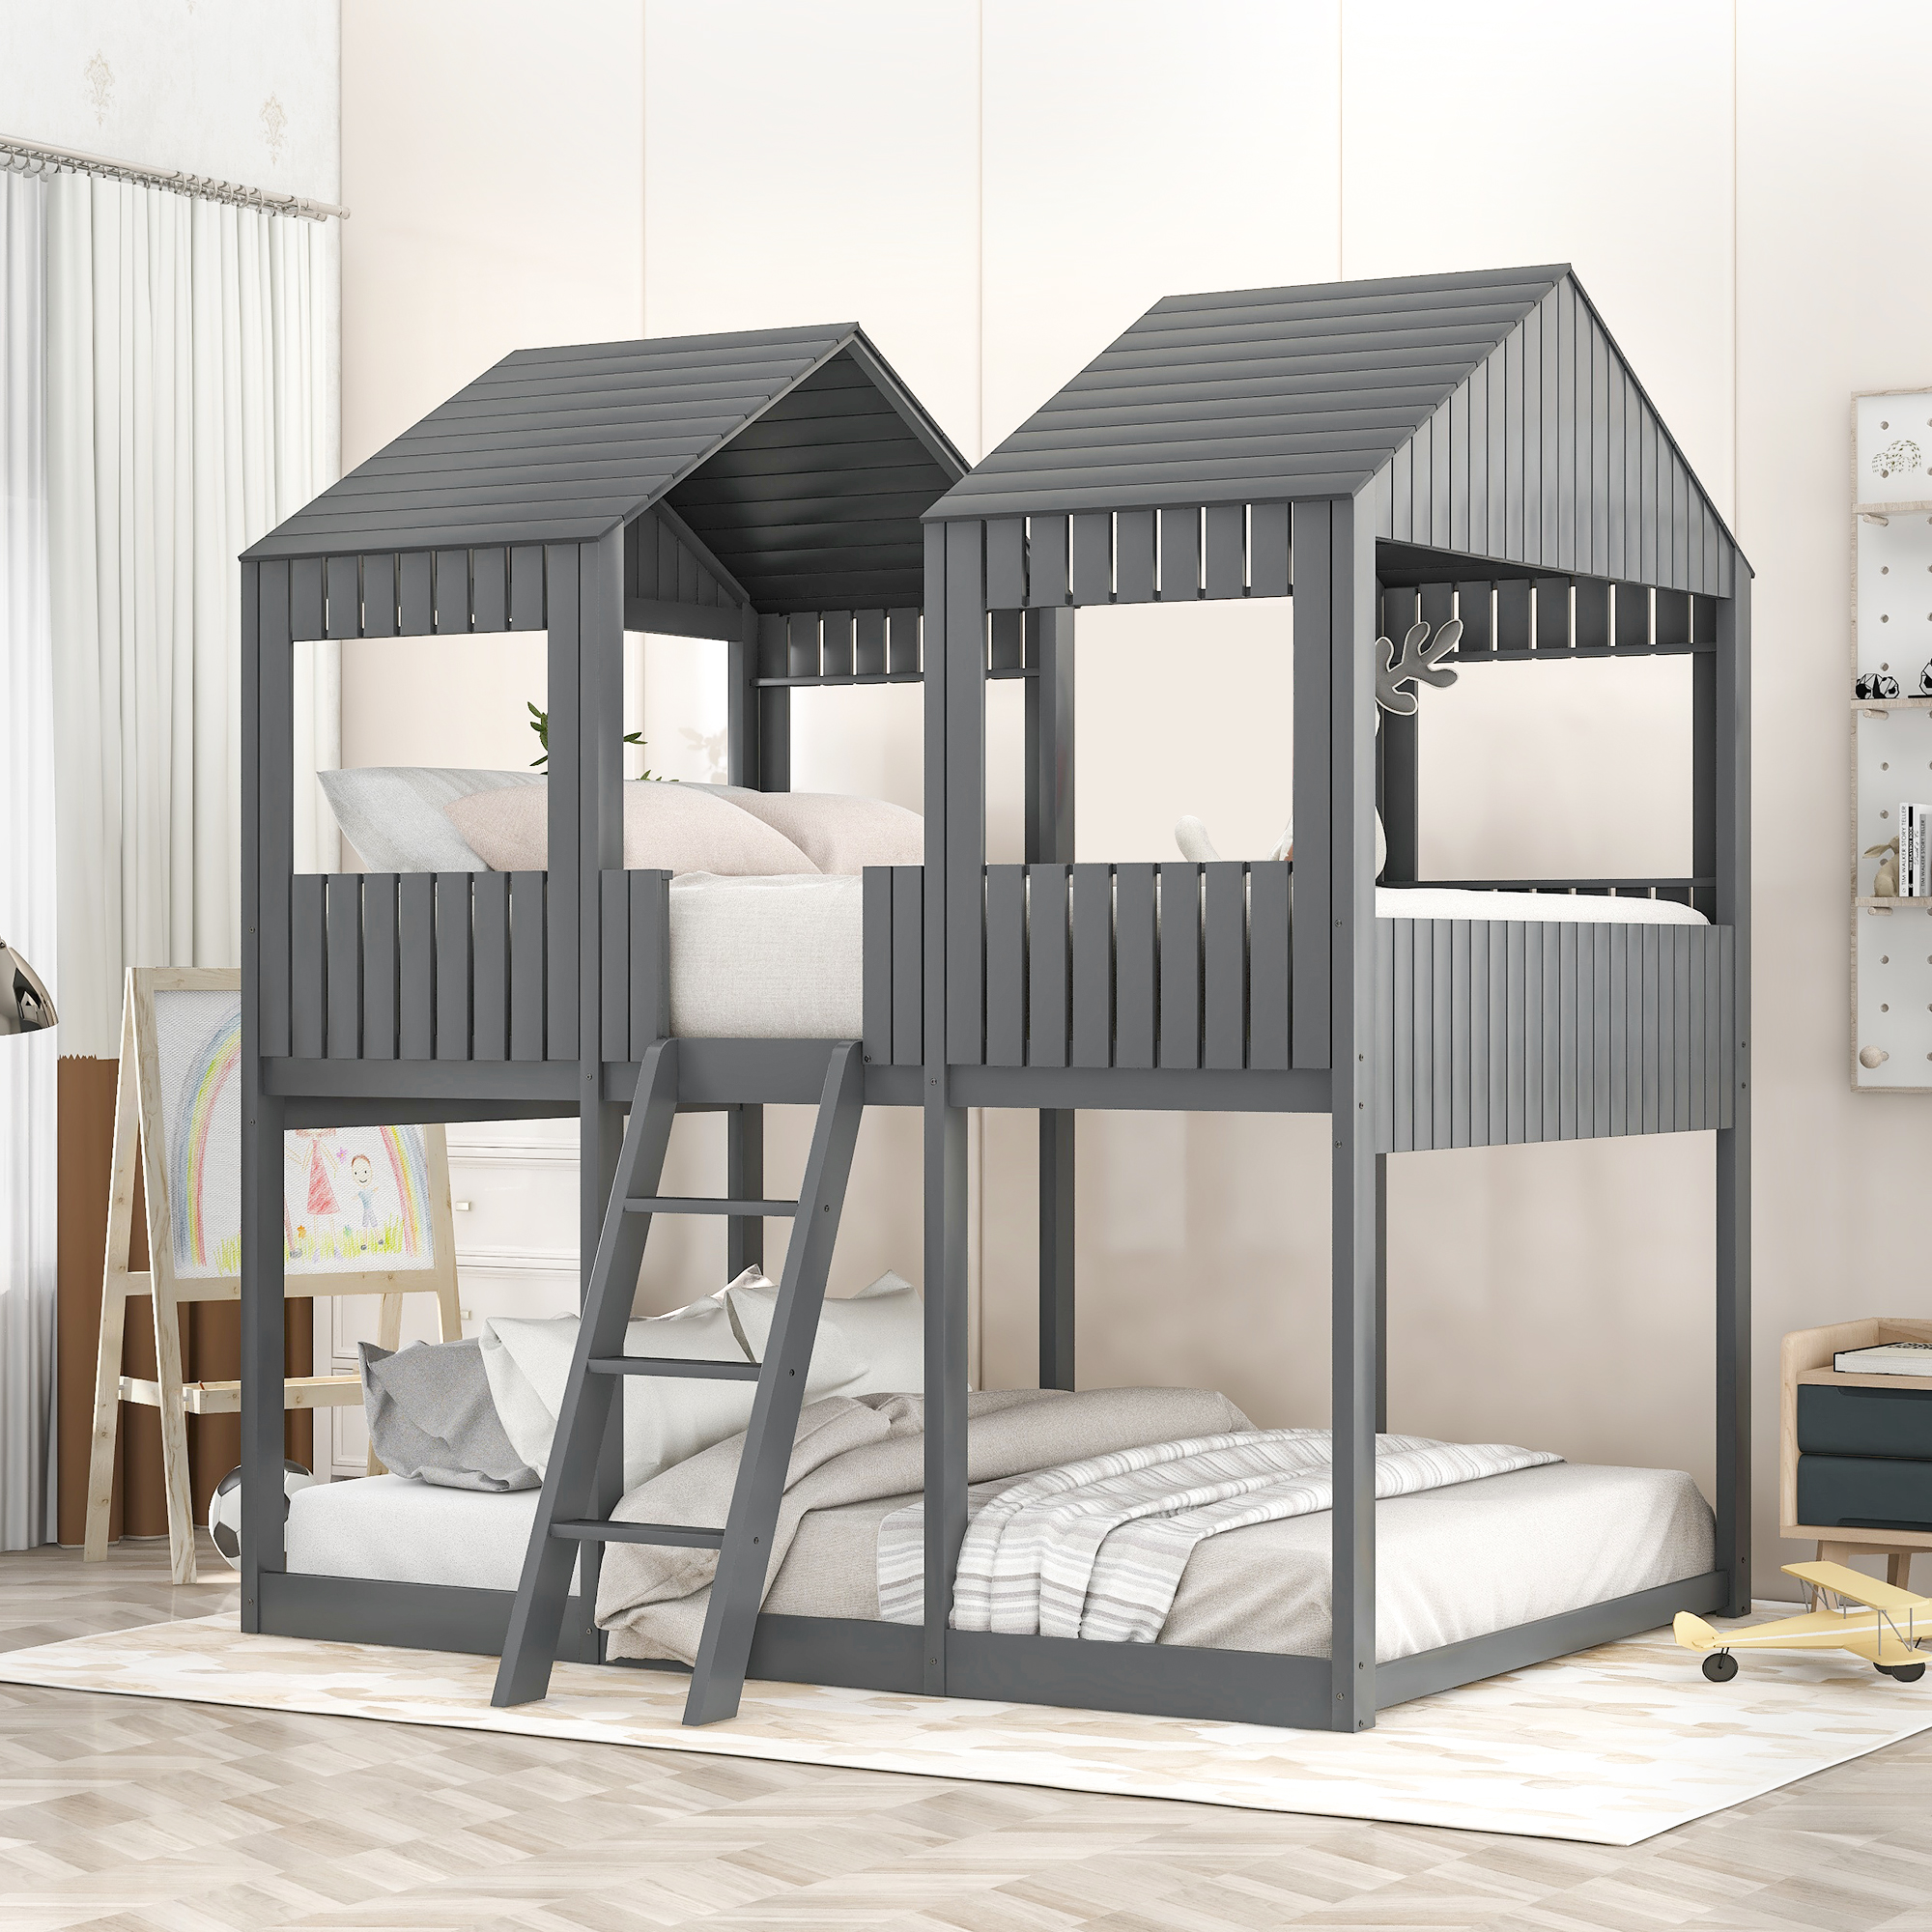 Full Over Full WoodBunk Bed with Roof, Window, Guardrail, Ladder (Gray)( old sku: LP000031AAN )-CASAINC